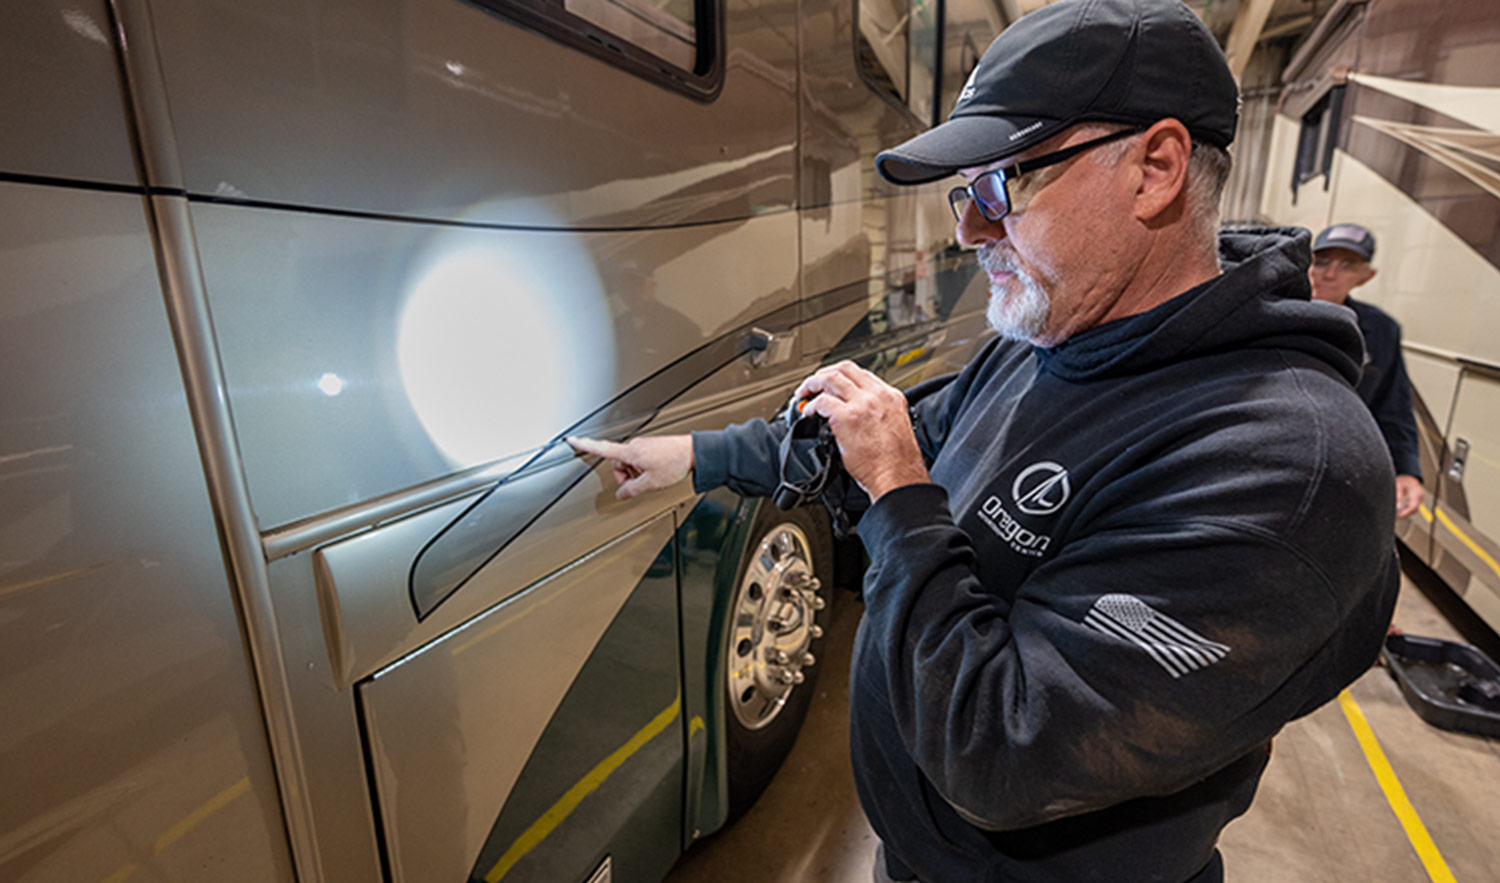 Matt Bryan, Oregon Motorcoach Center’s assistant service manager, stands by an RV with a flashlight doing an exterior inspection